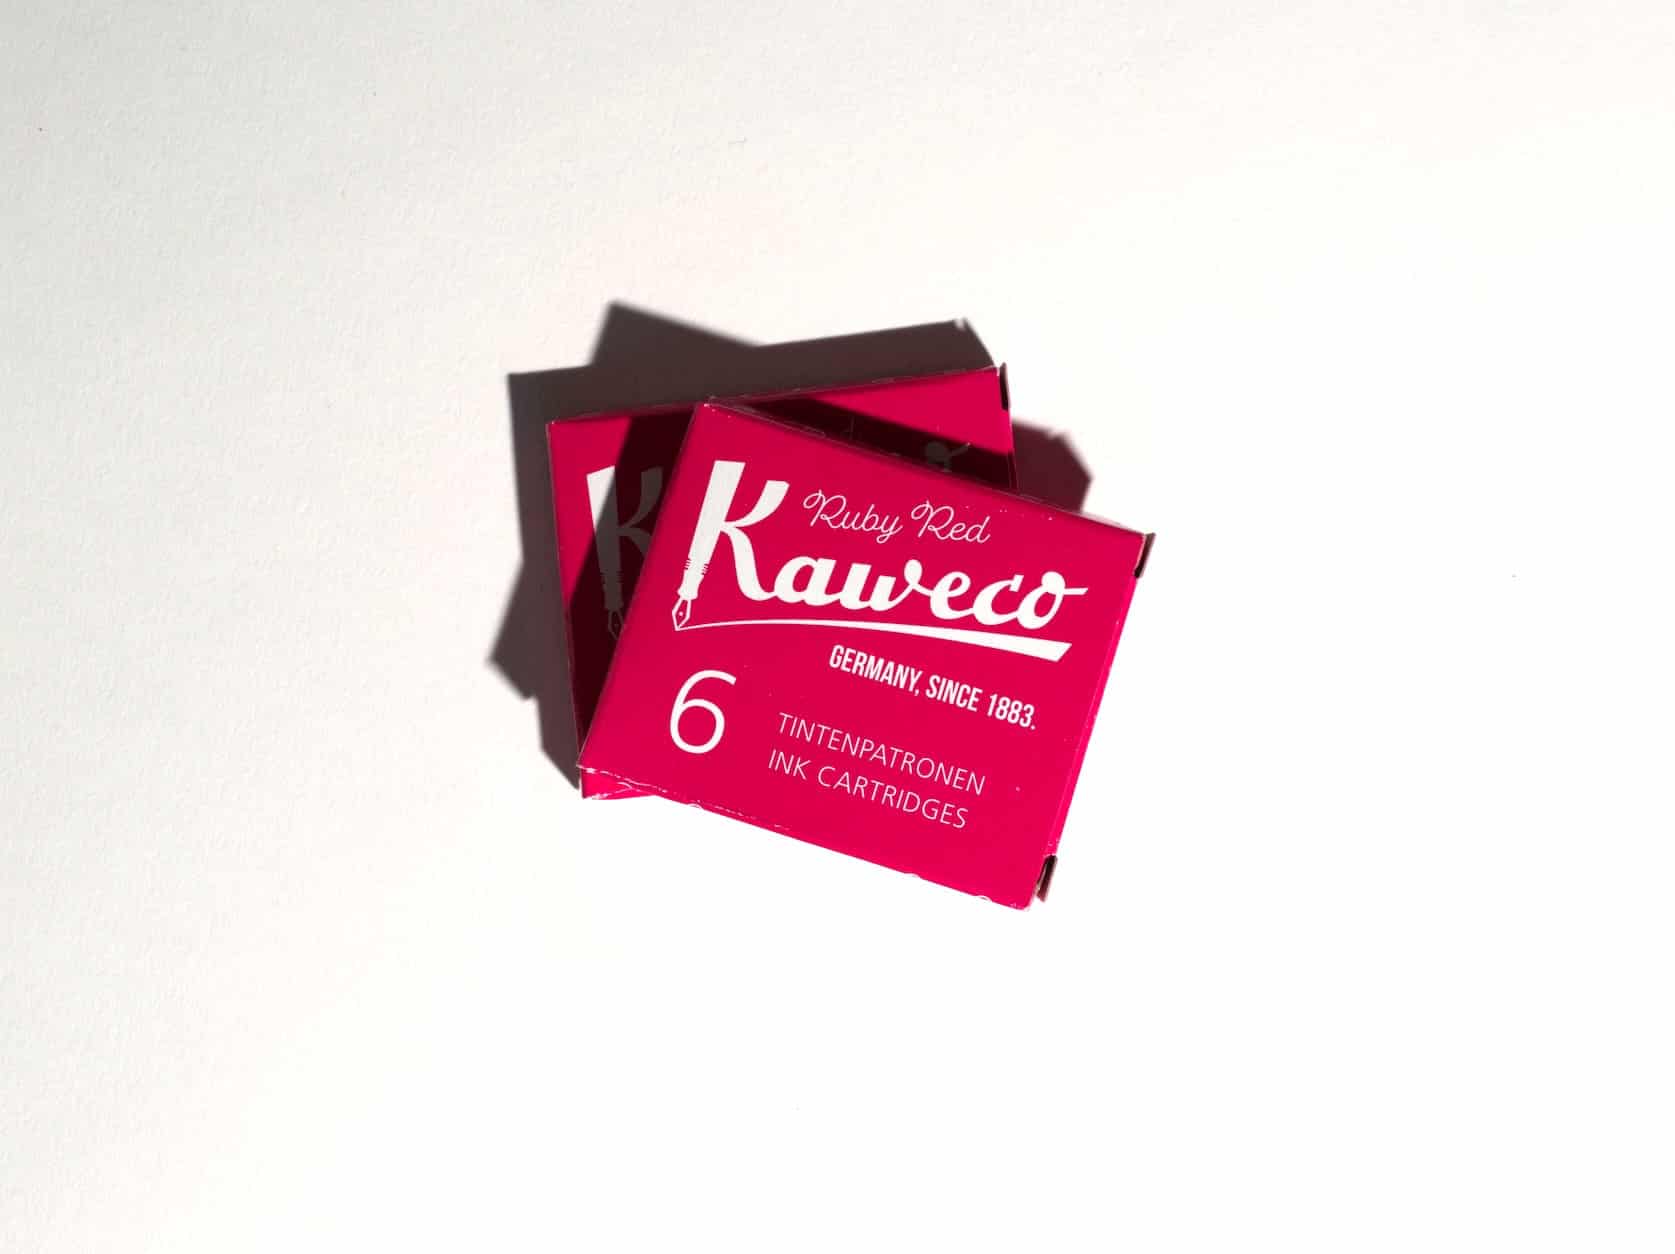 Two boxes of ink cartridges lie on a white surface. Text on packaging reads: Kaweco. Ruby Red. Germany, since 1883. 6 Tintenpatronen. Ink Cartridges.